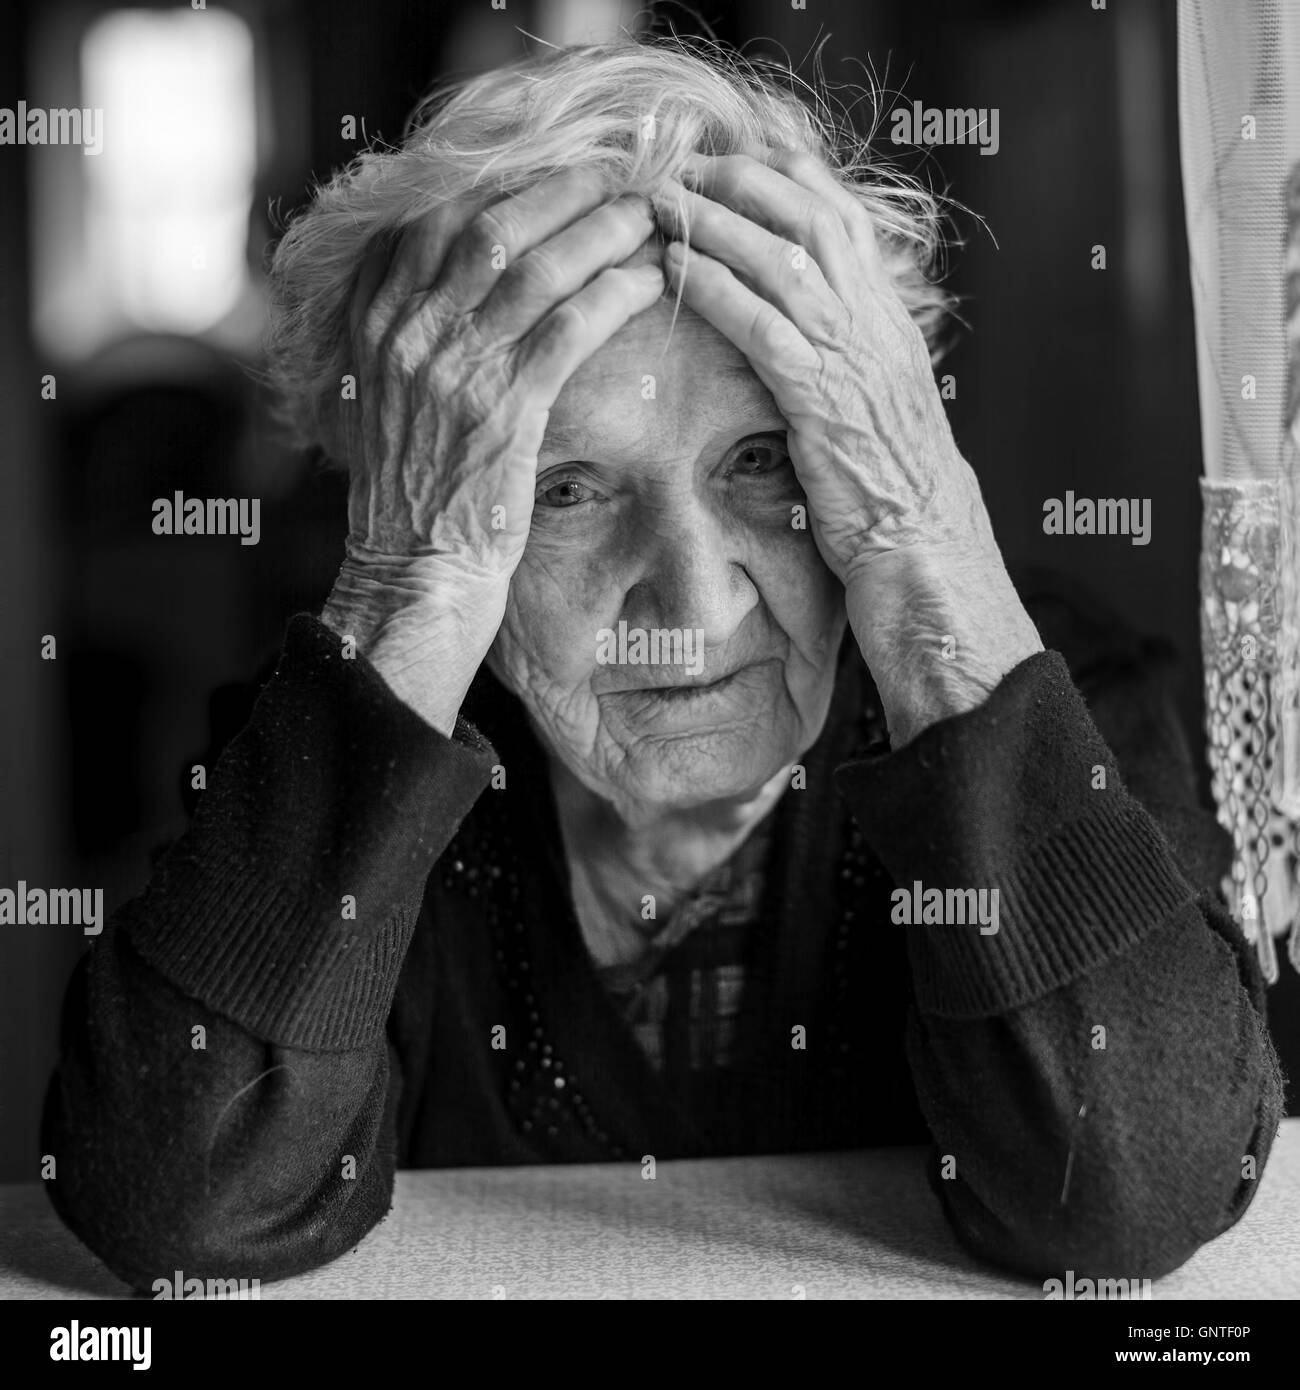 Sad elderly woman holds hands a head. Black and white photo. Stock Photo